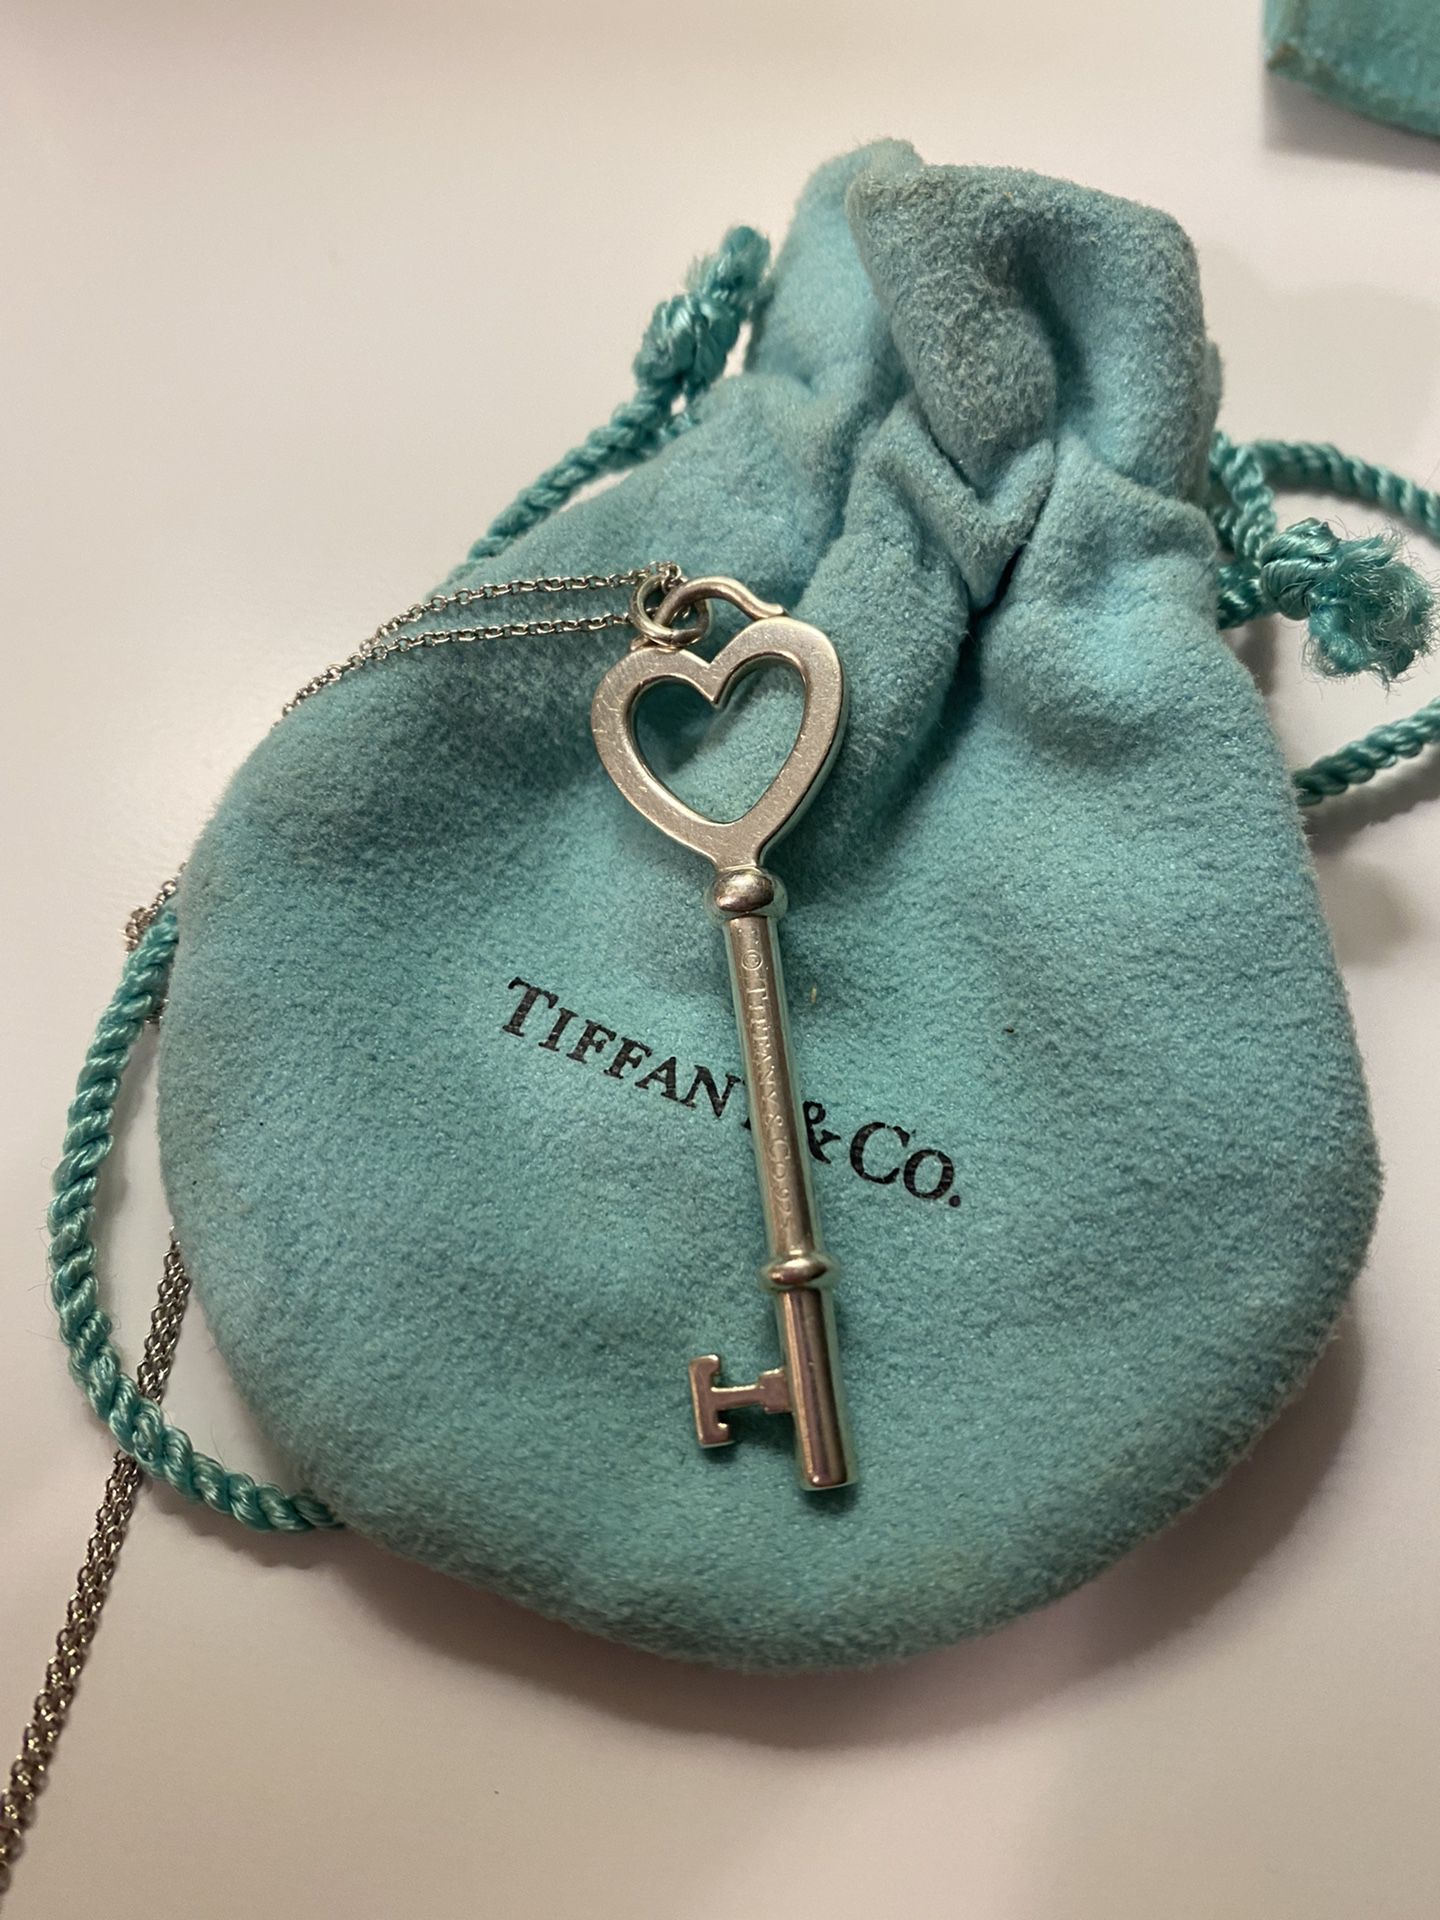 Tiffany & Co. Sterling Silver 2” Key Pendant And 16” Tiffany Chain